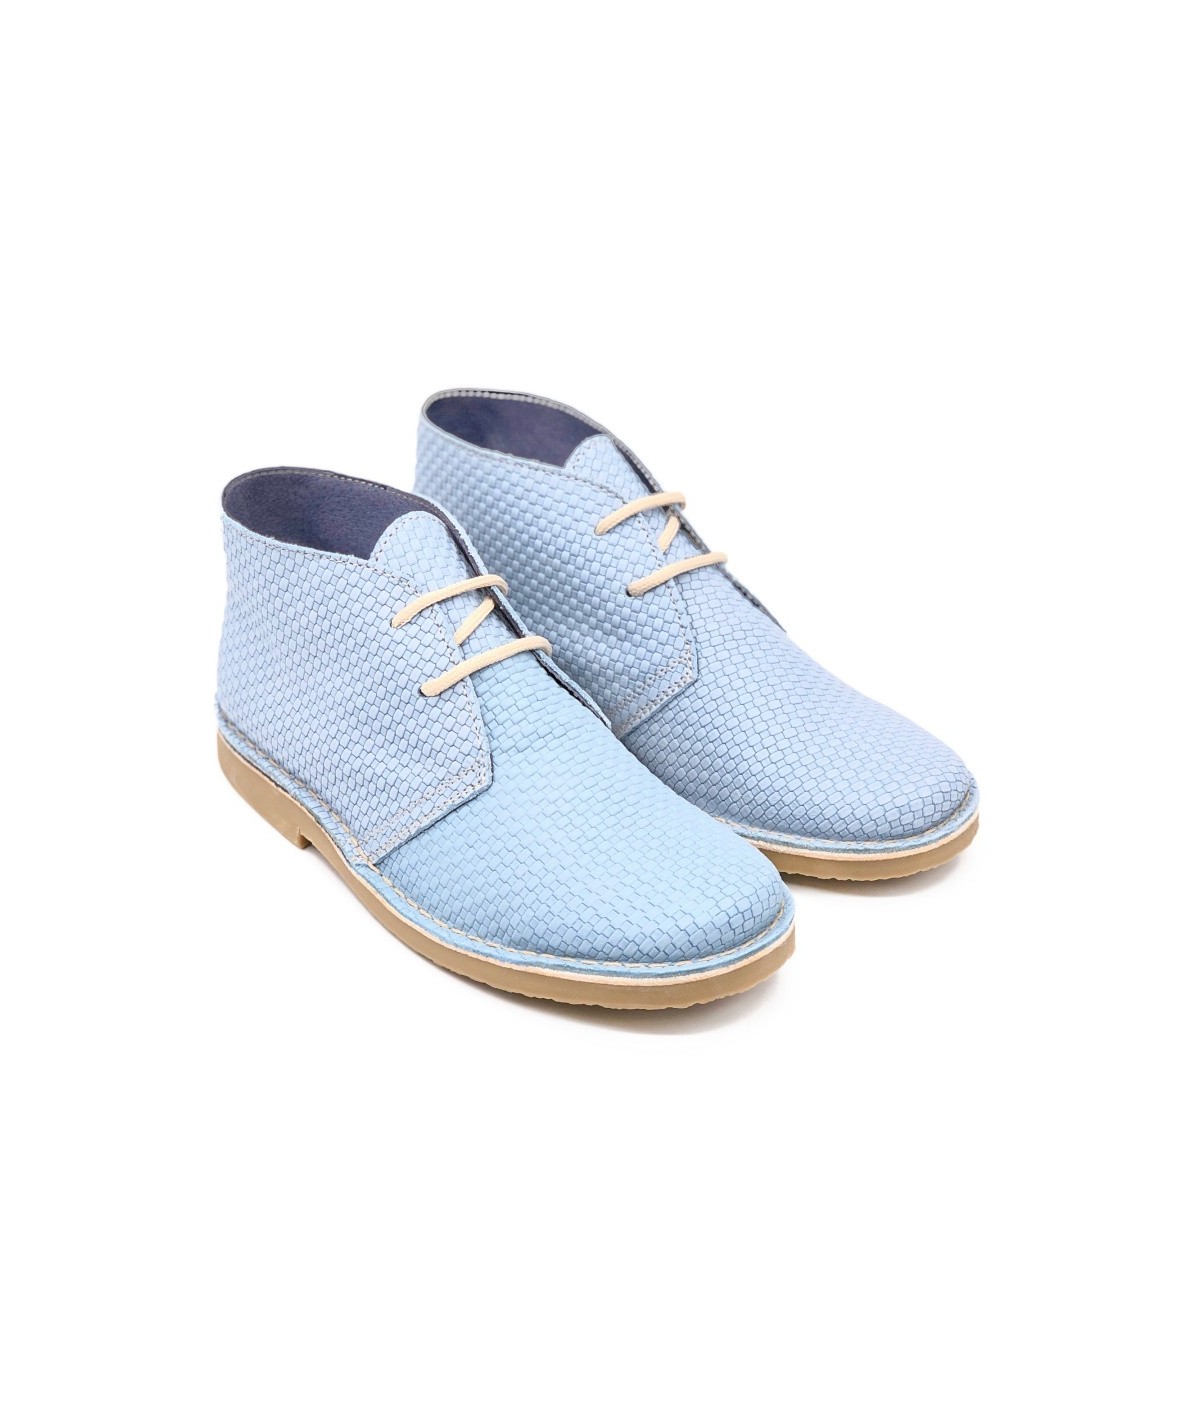 GOMERA sky blue boots for women